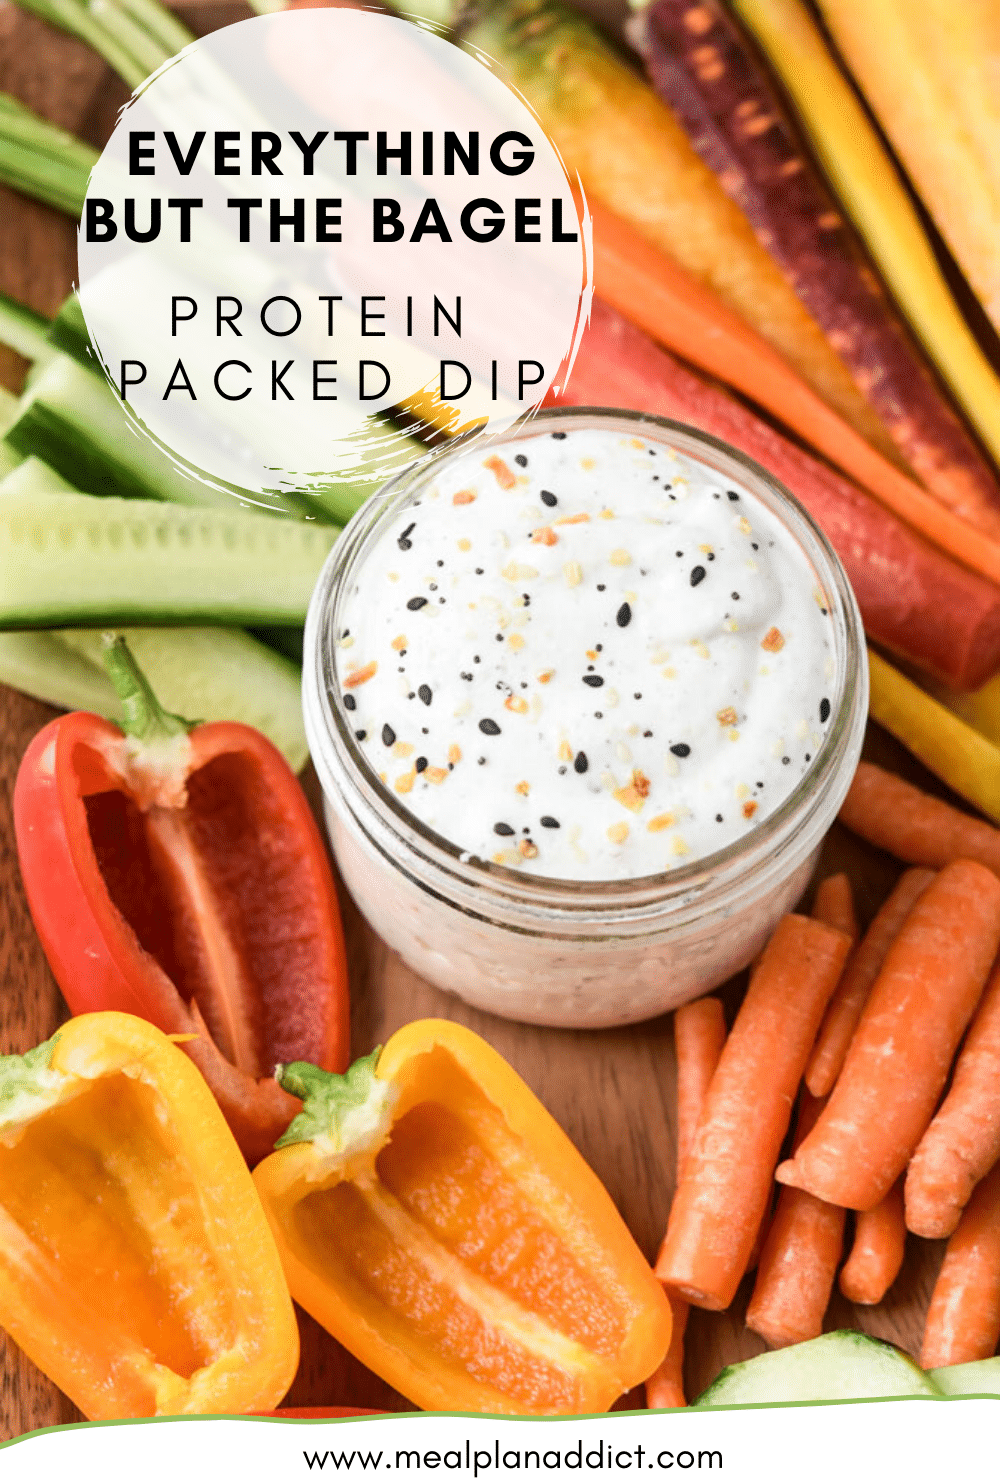 Everything But the Bagel Protein Packed Dip